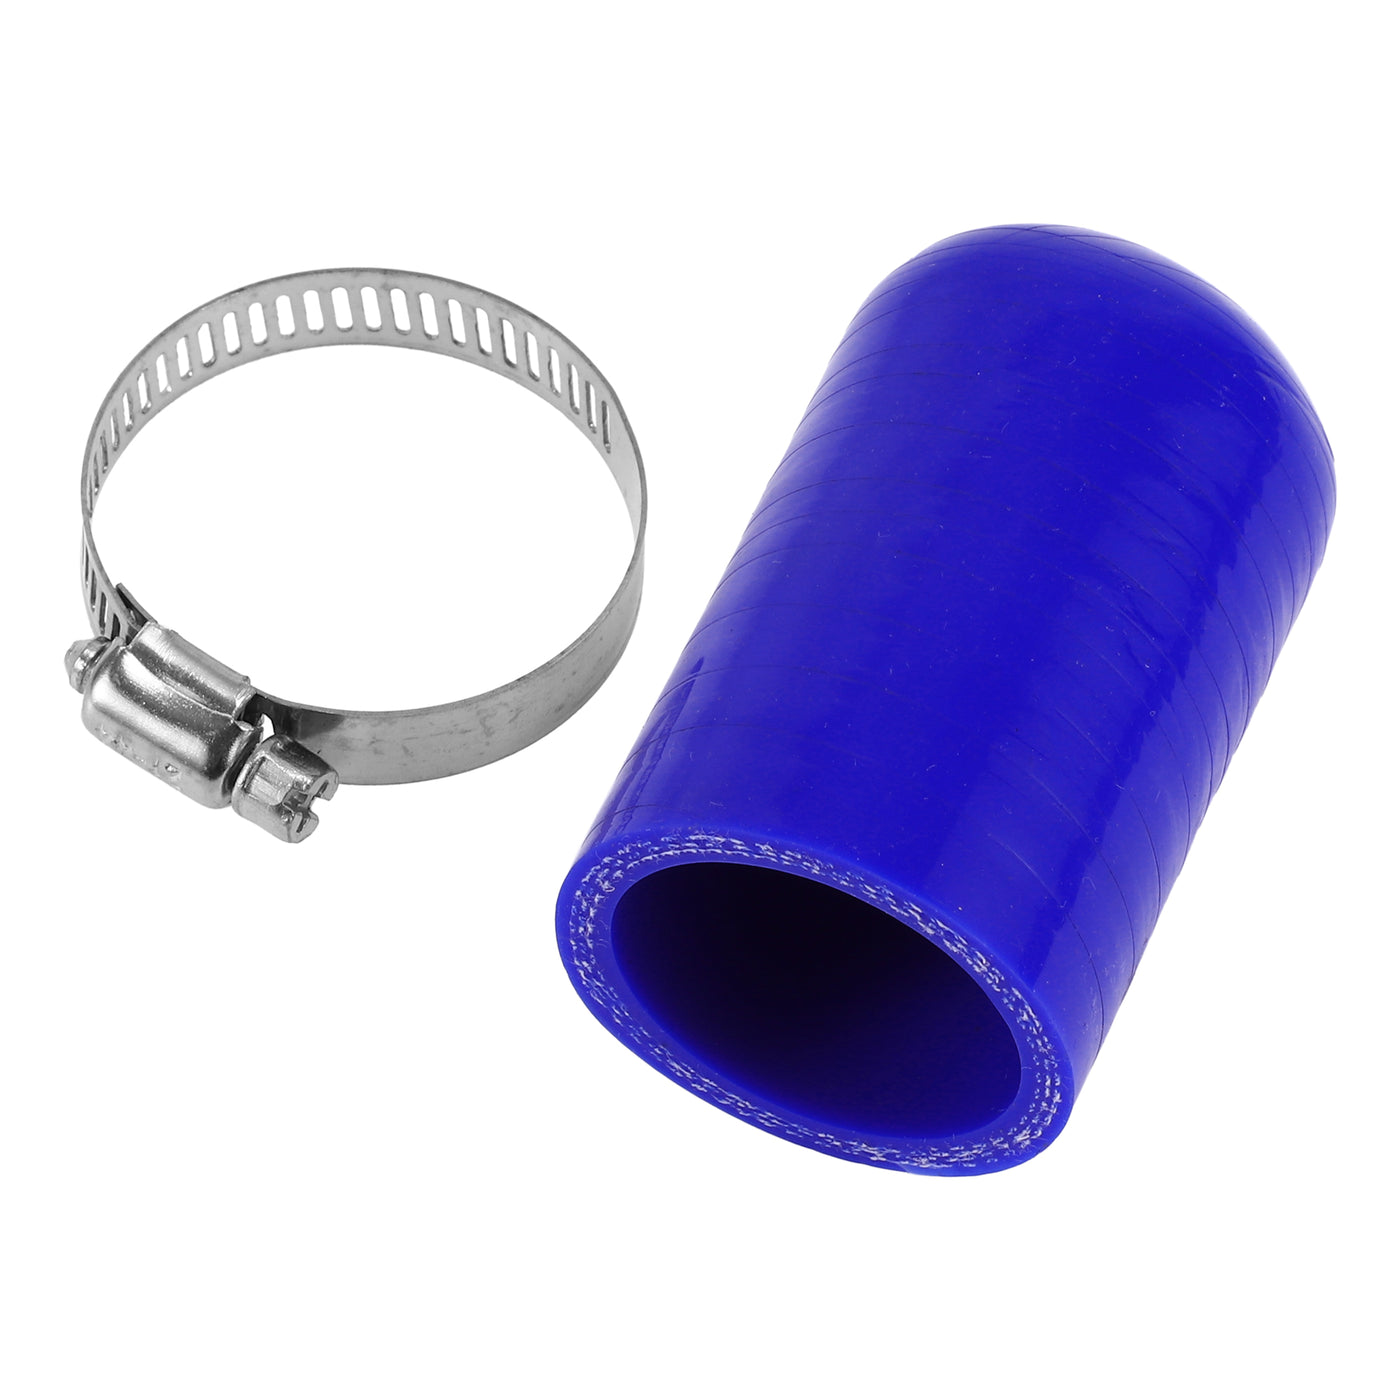 X AUTOHAUX 1 Pcs 60mm Length 35mm/1.38" ID Blue Car Silicone Rubber Hose End Cap with Clamp Silicone Reinforced Blanking Cap for Bypass Tube Universal